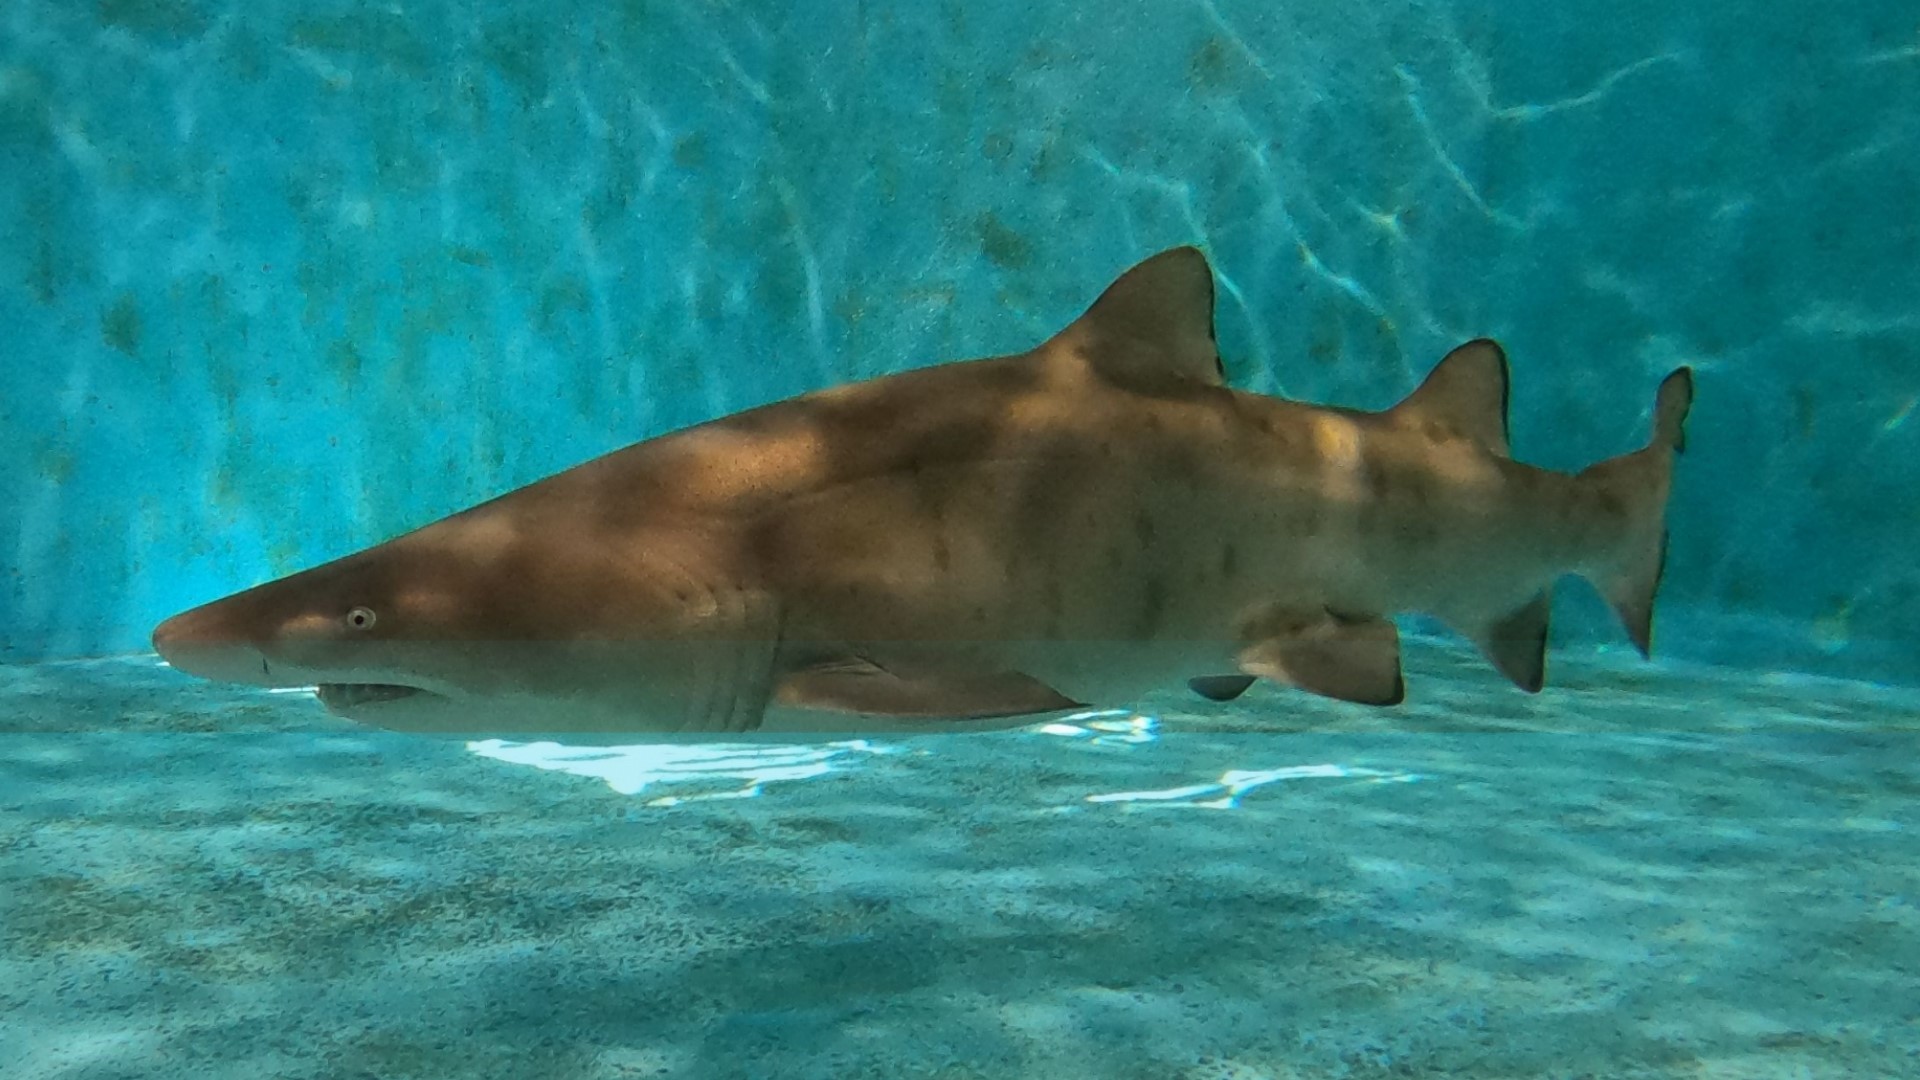 Baby "Rip" is incredibly important -- he's the first sand tiger shark to be born alive in captivity in the United States. His mother was artificially inseminated.